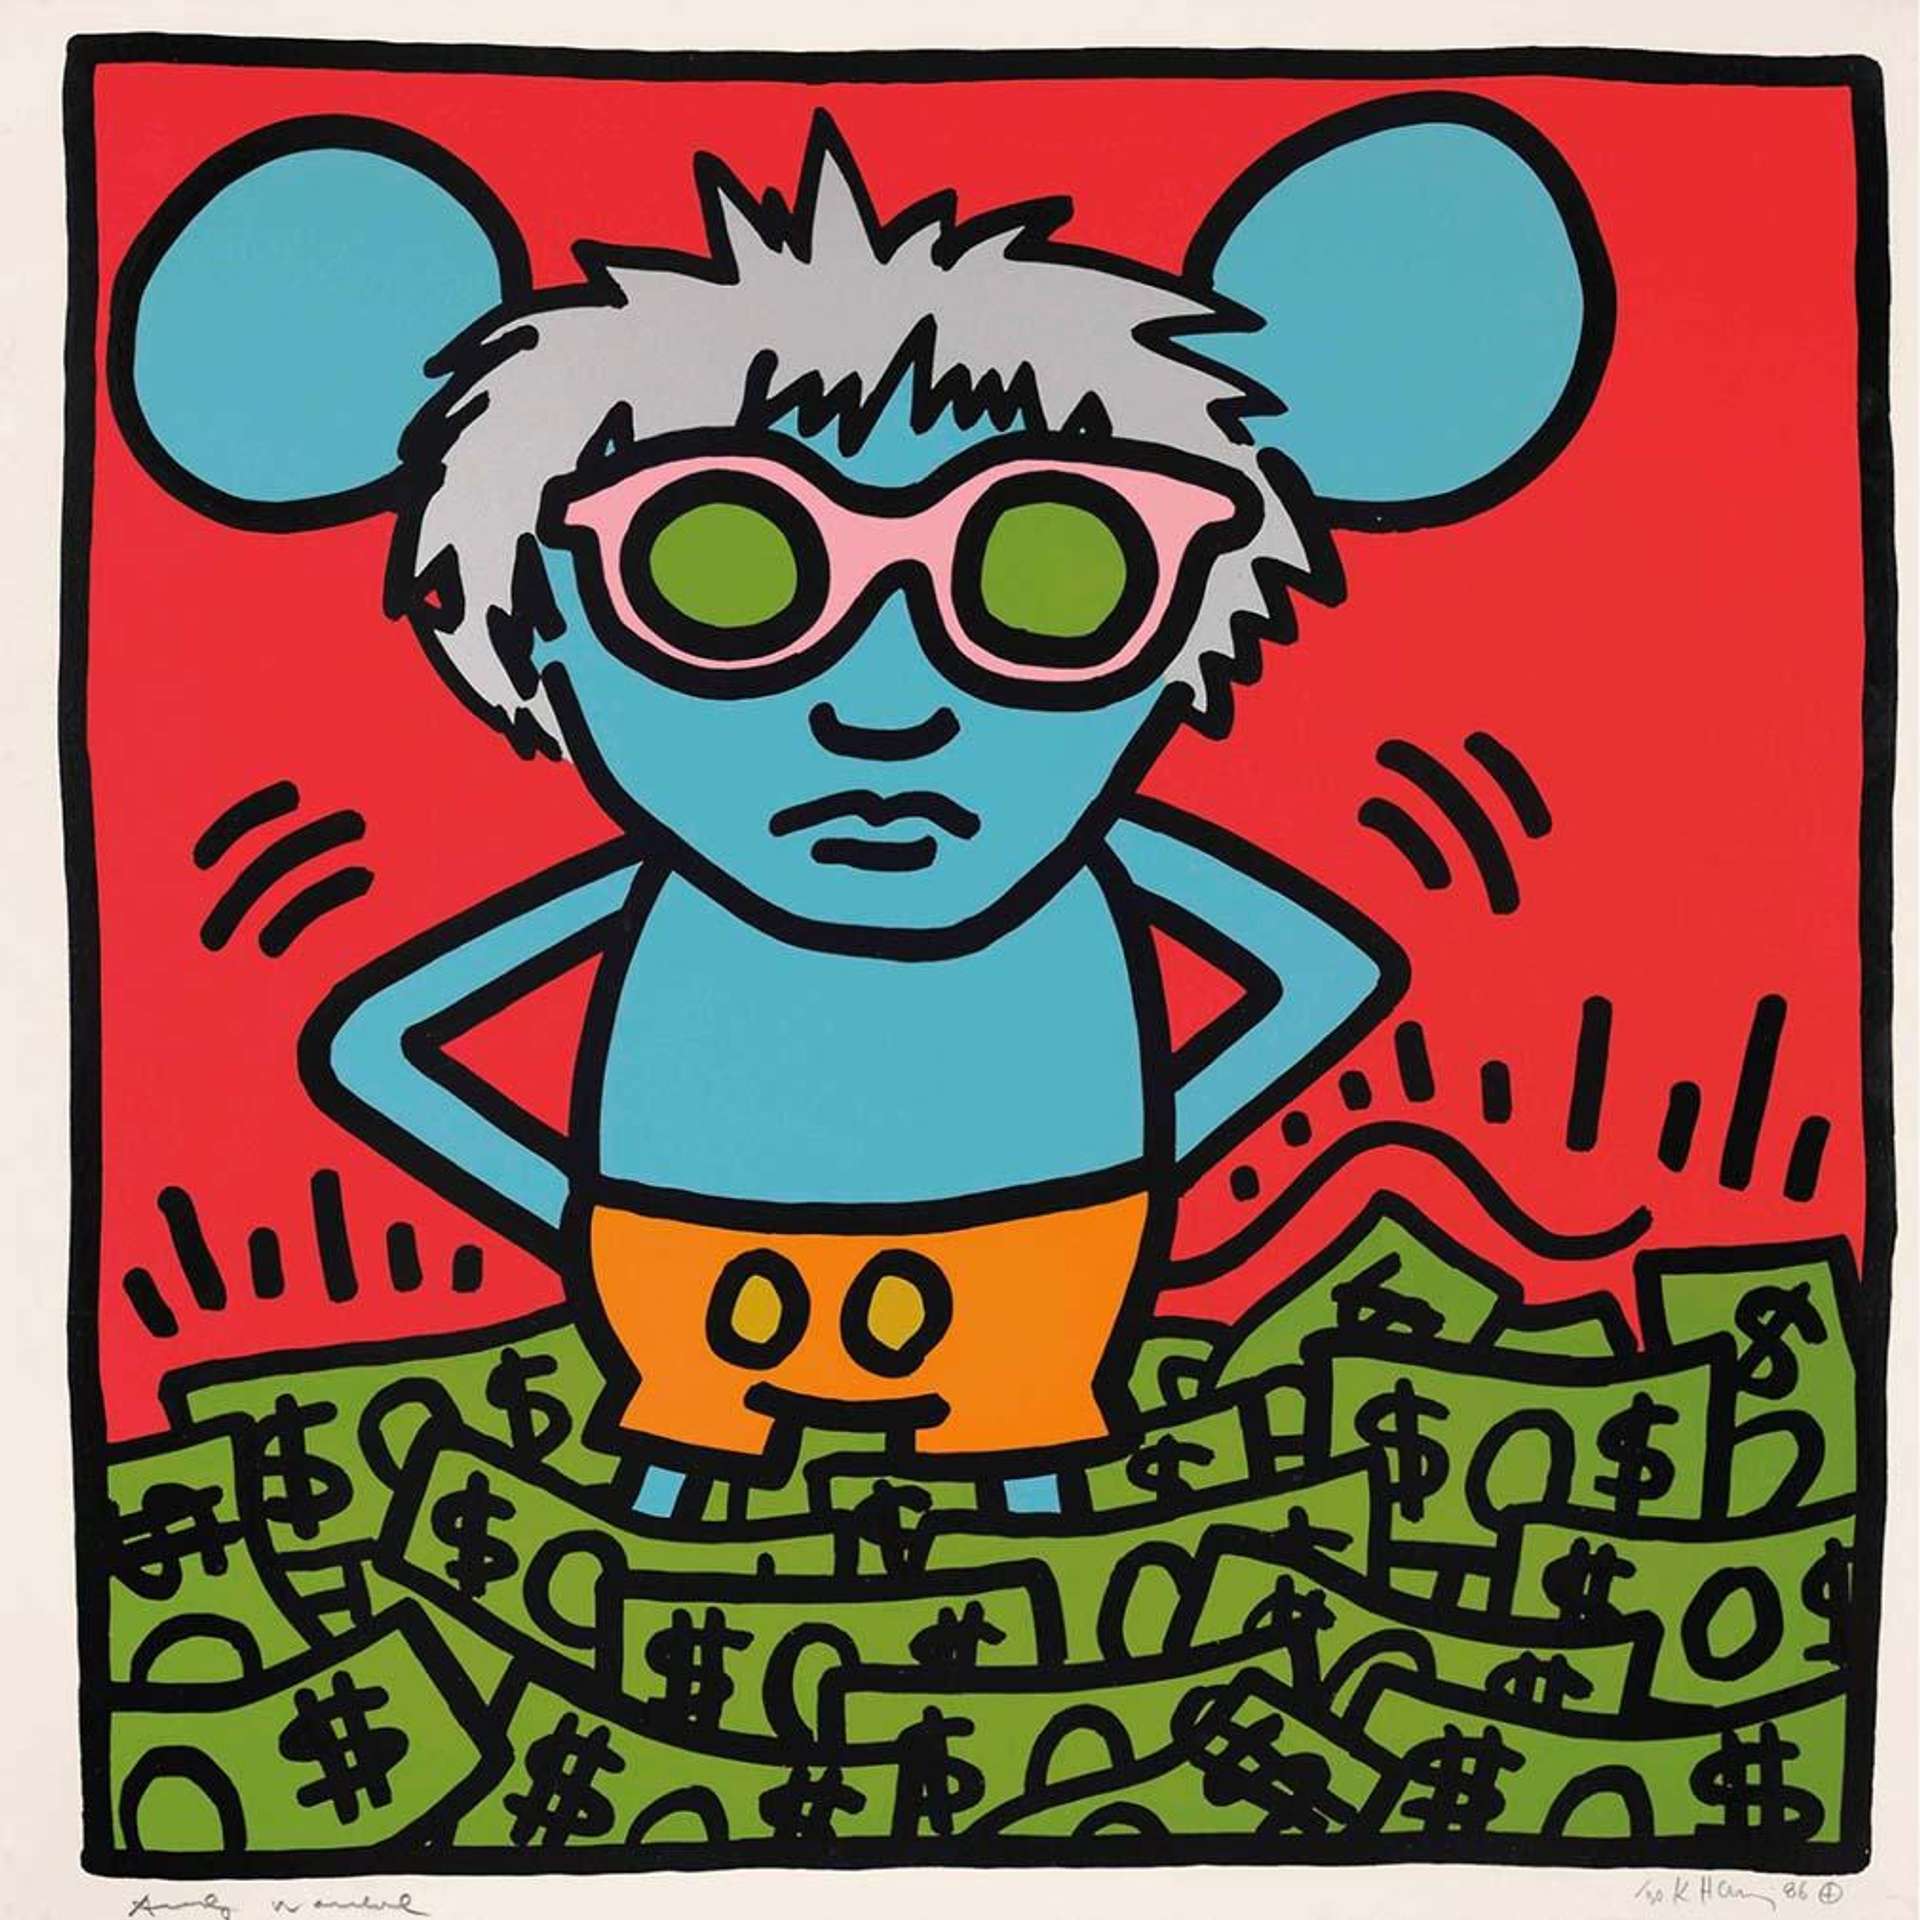 A blue pop-art mouse, who is presented to be Andy Warhol, wearing thick yellow glasses and orange shorts stood in a sea of green American dollar bills